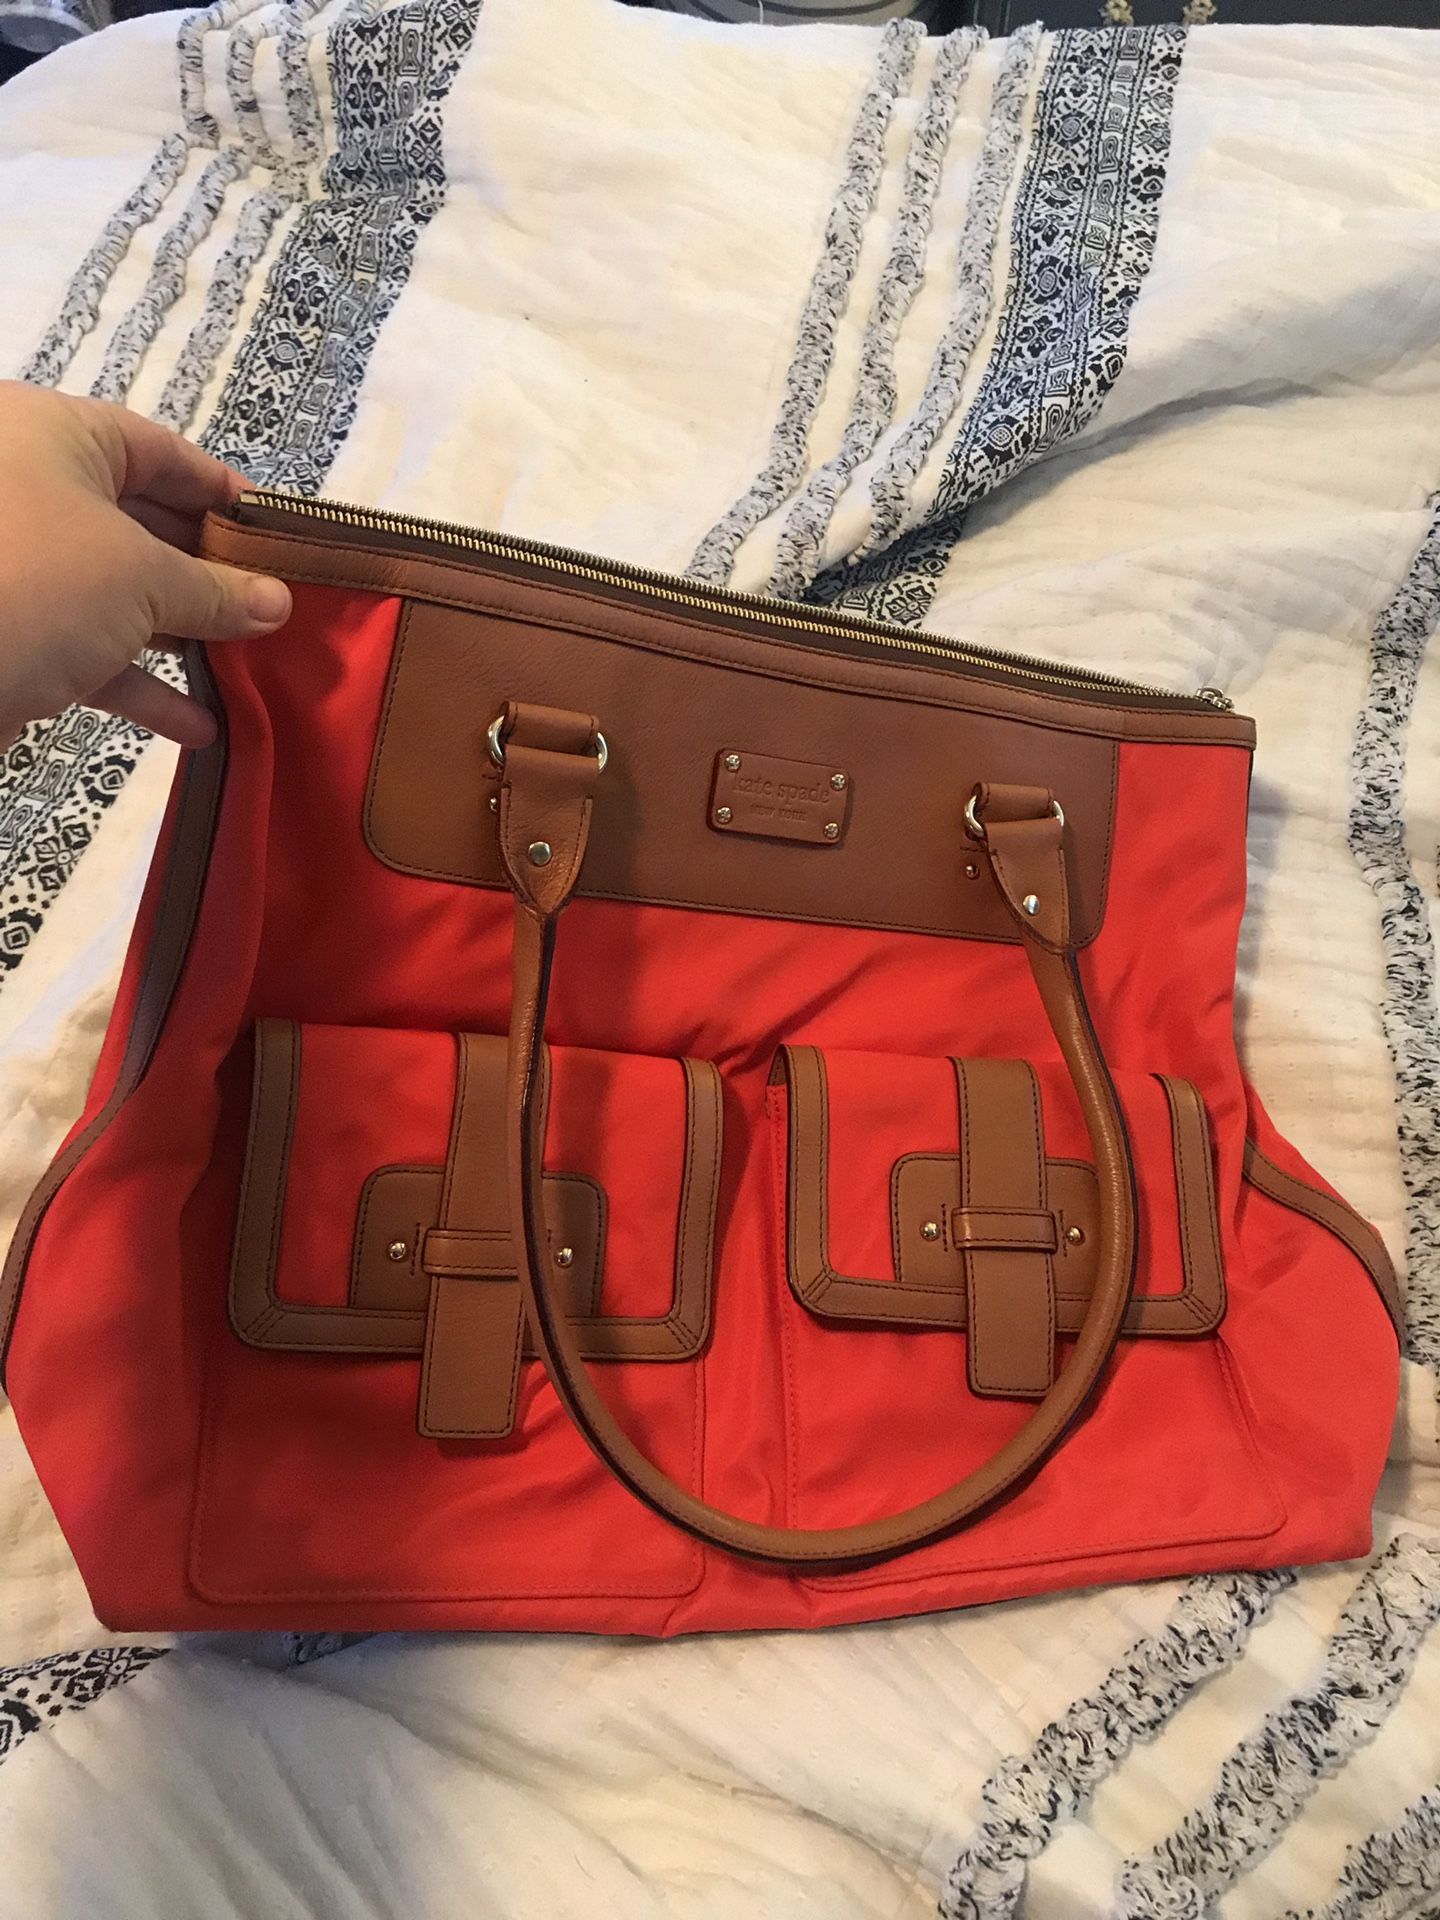 Kate spade large purse. Great condition. Used once.